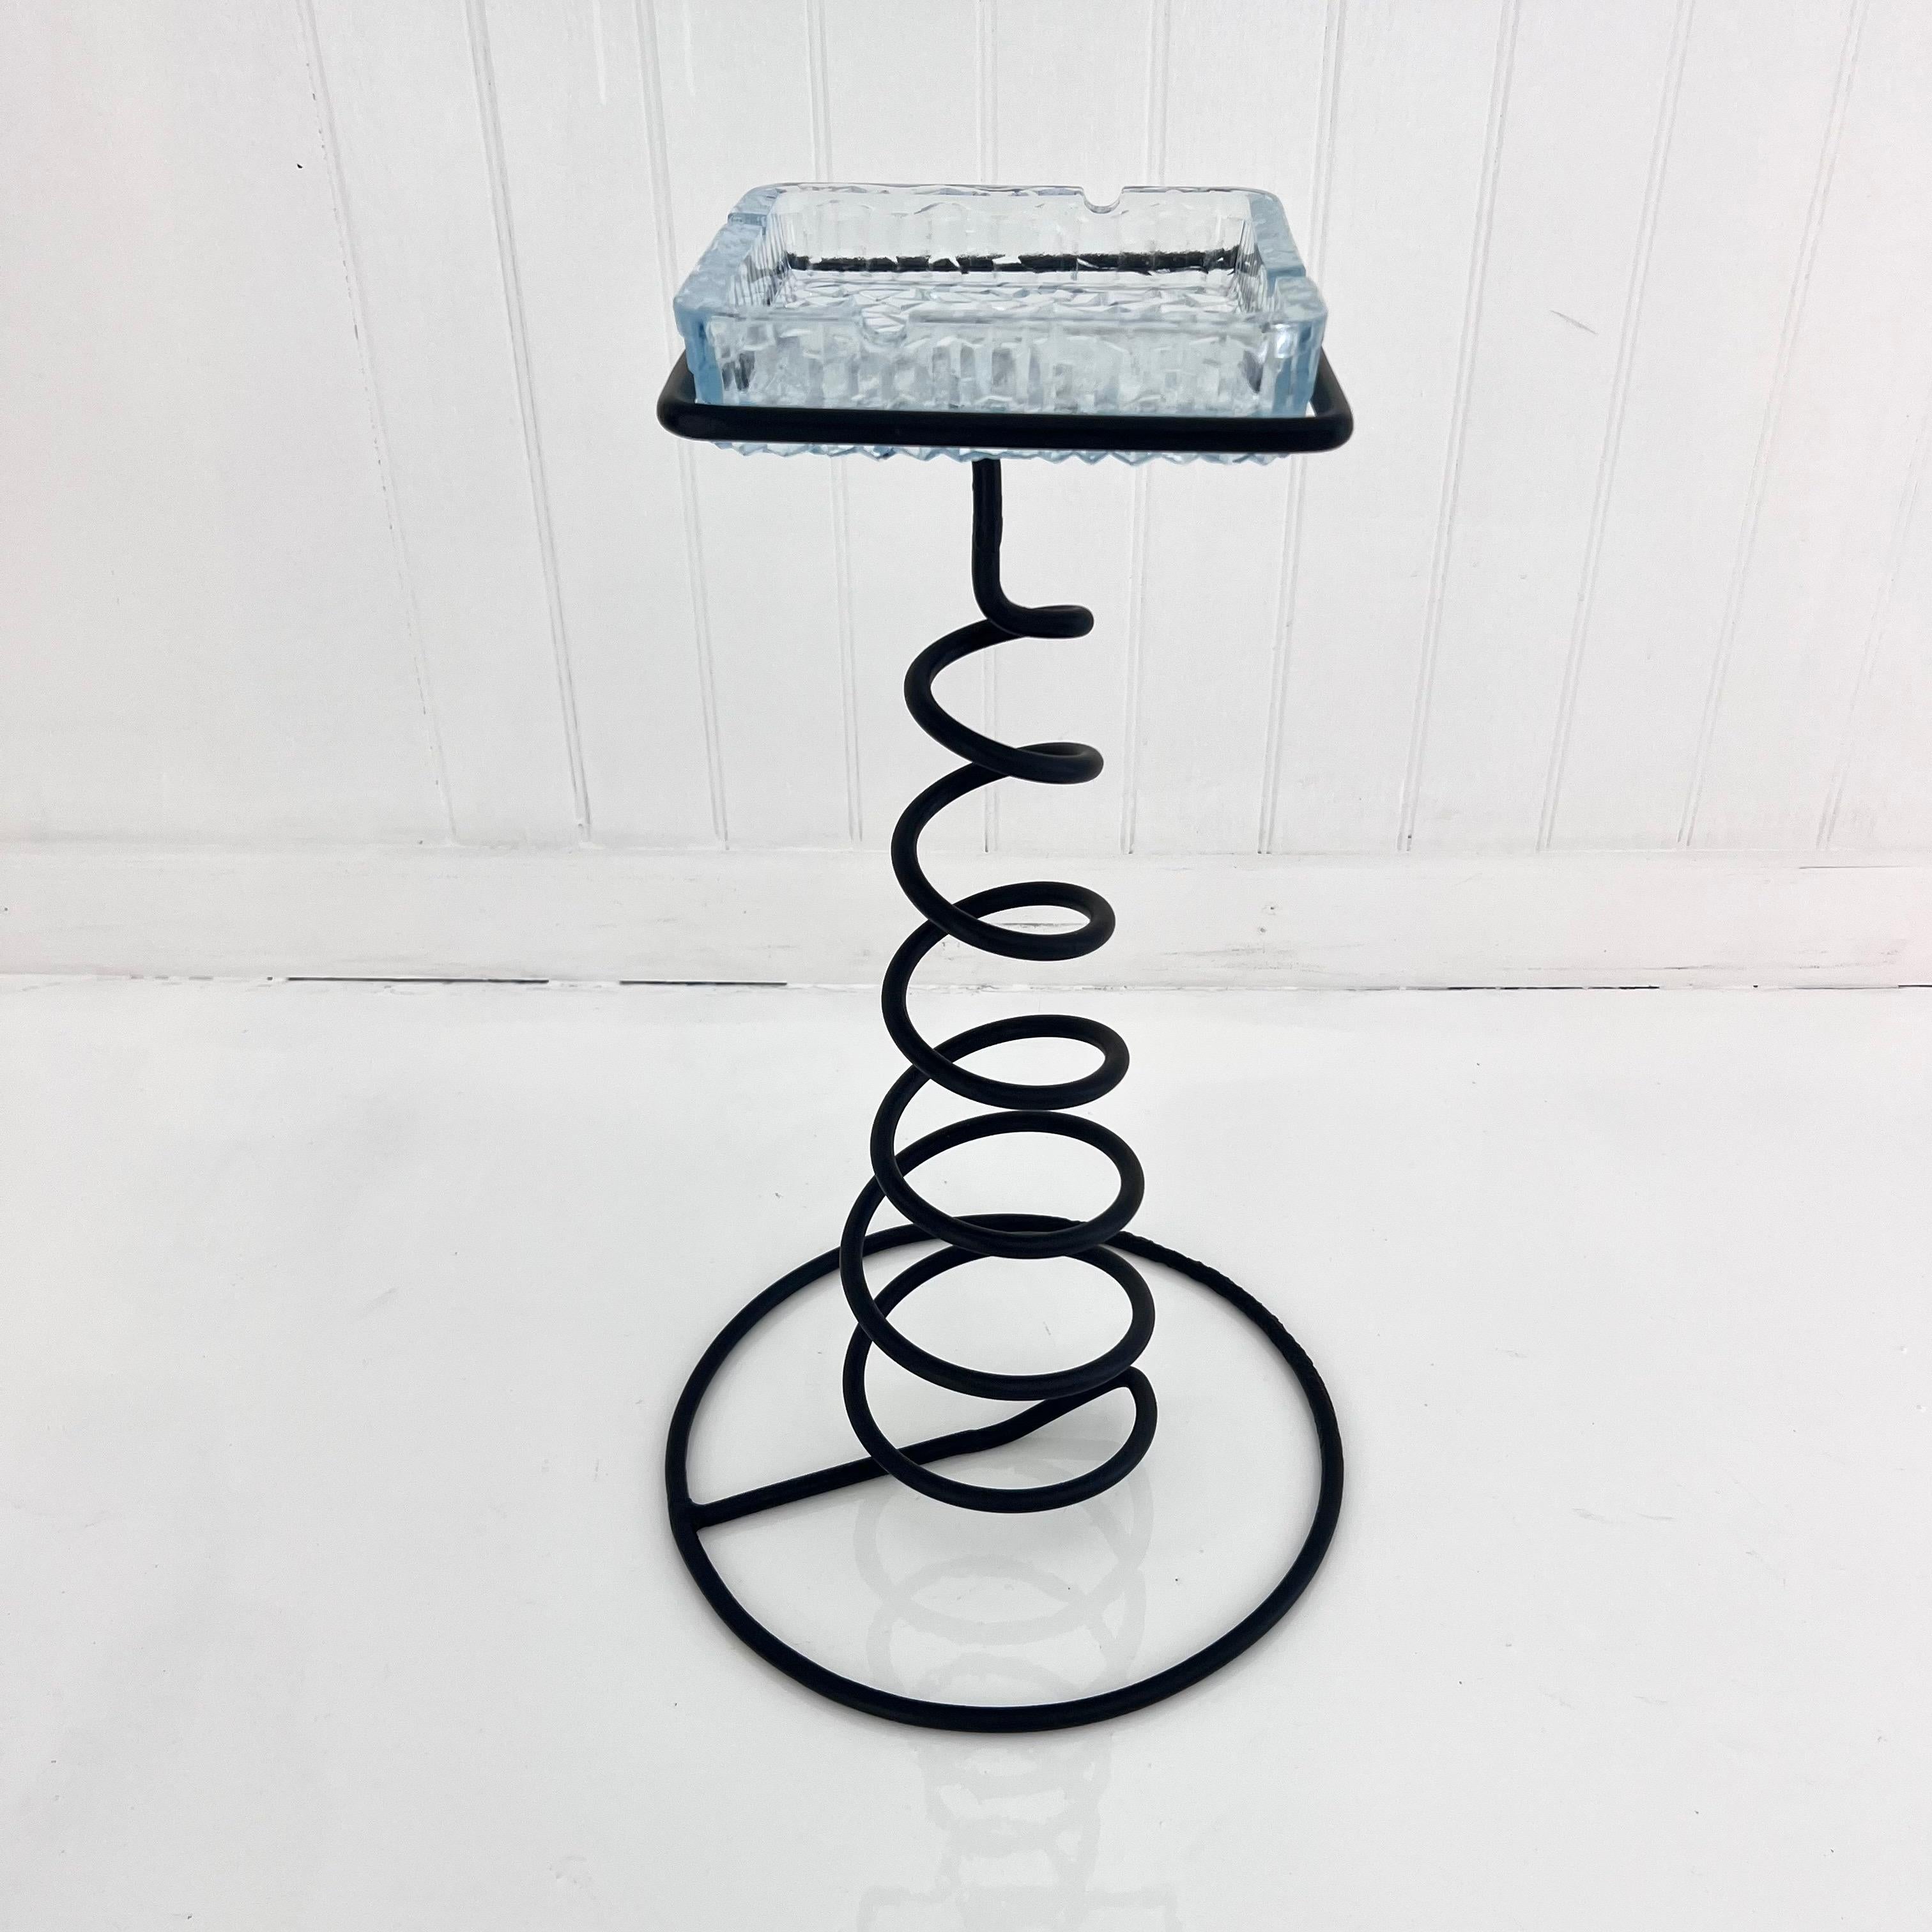 Sculptural standing catchall made of iron, twisted in an elegant spiral design. Starting small at the top and then widening out towards the bottom, until reaching the large circular base. One substantial clear crystal dish with a magnificent